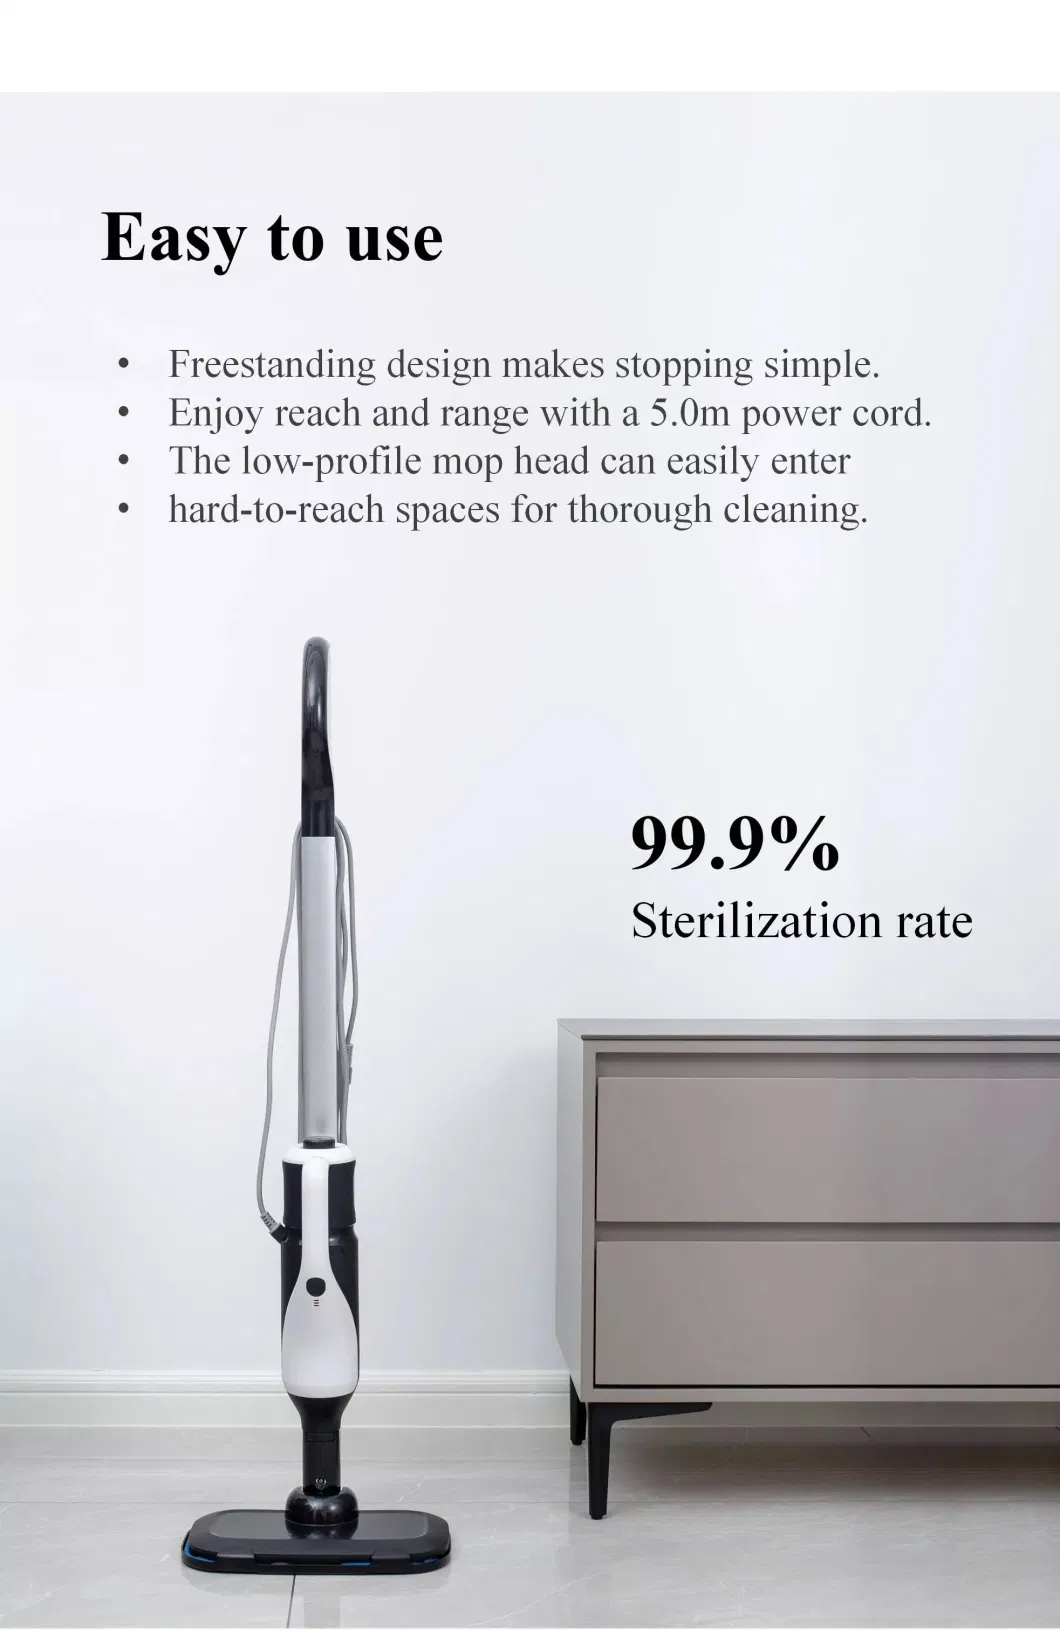 Multifunctional Steam Mop 1400W Power Handheld Upright Floor Steam Cleaner Cyclone Dry Stick Upright Household Vacuum Cleaner